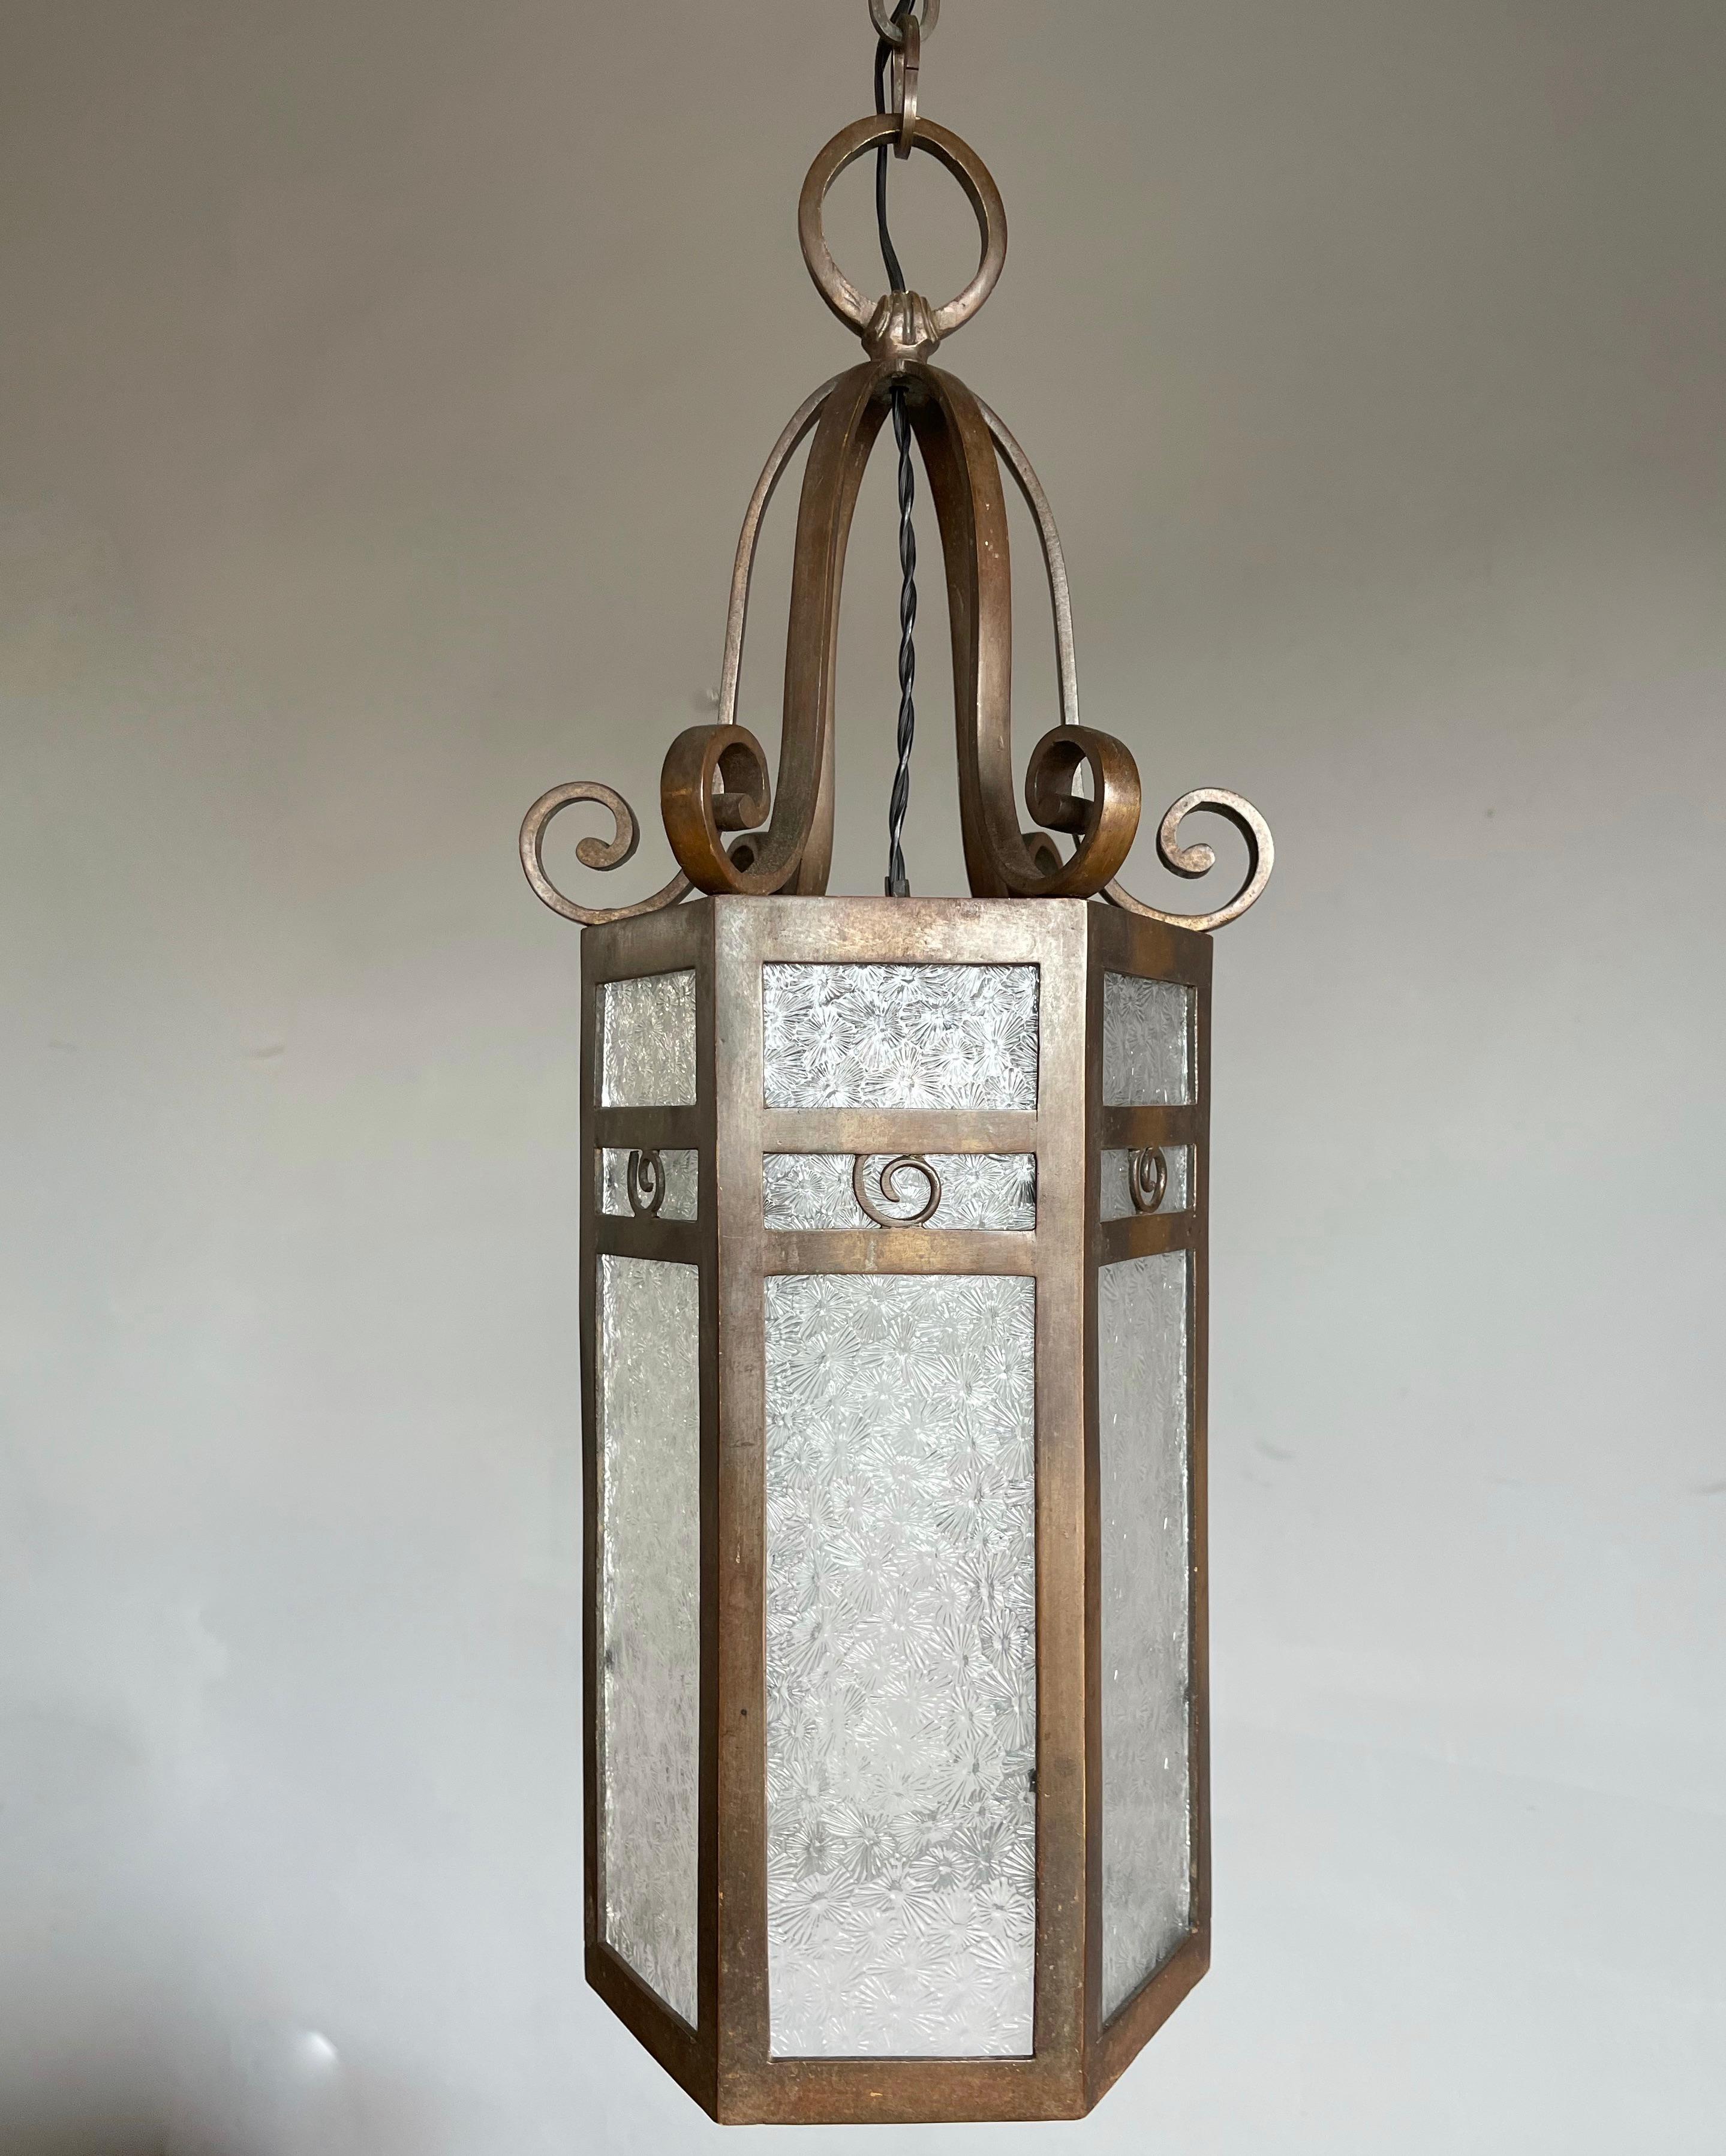 Truly beautiful and practical size, single light Art Deco light fixture.

With early 20th century lighting as one of our passions, we never cease to be amazed with the variety, quality and beauty of the light fixtures that were made in those days.